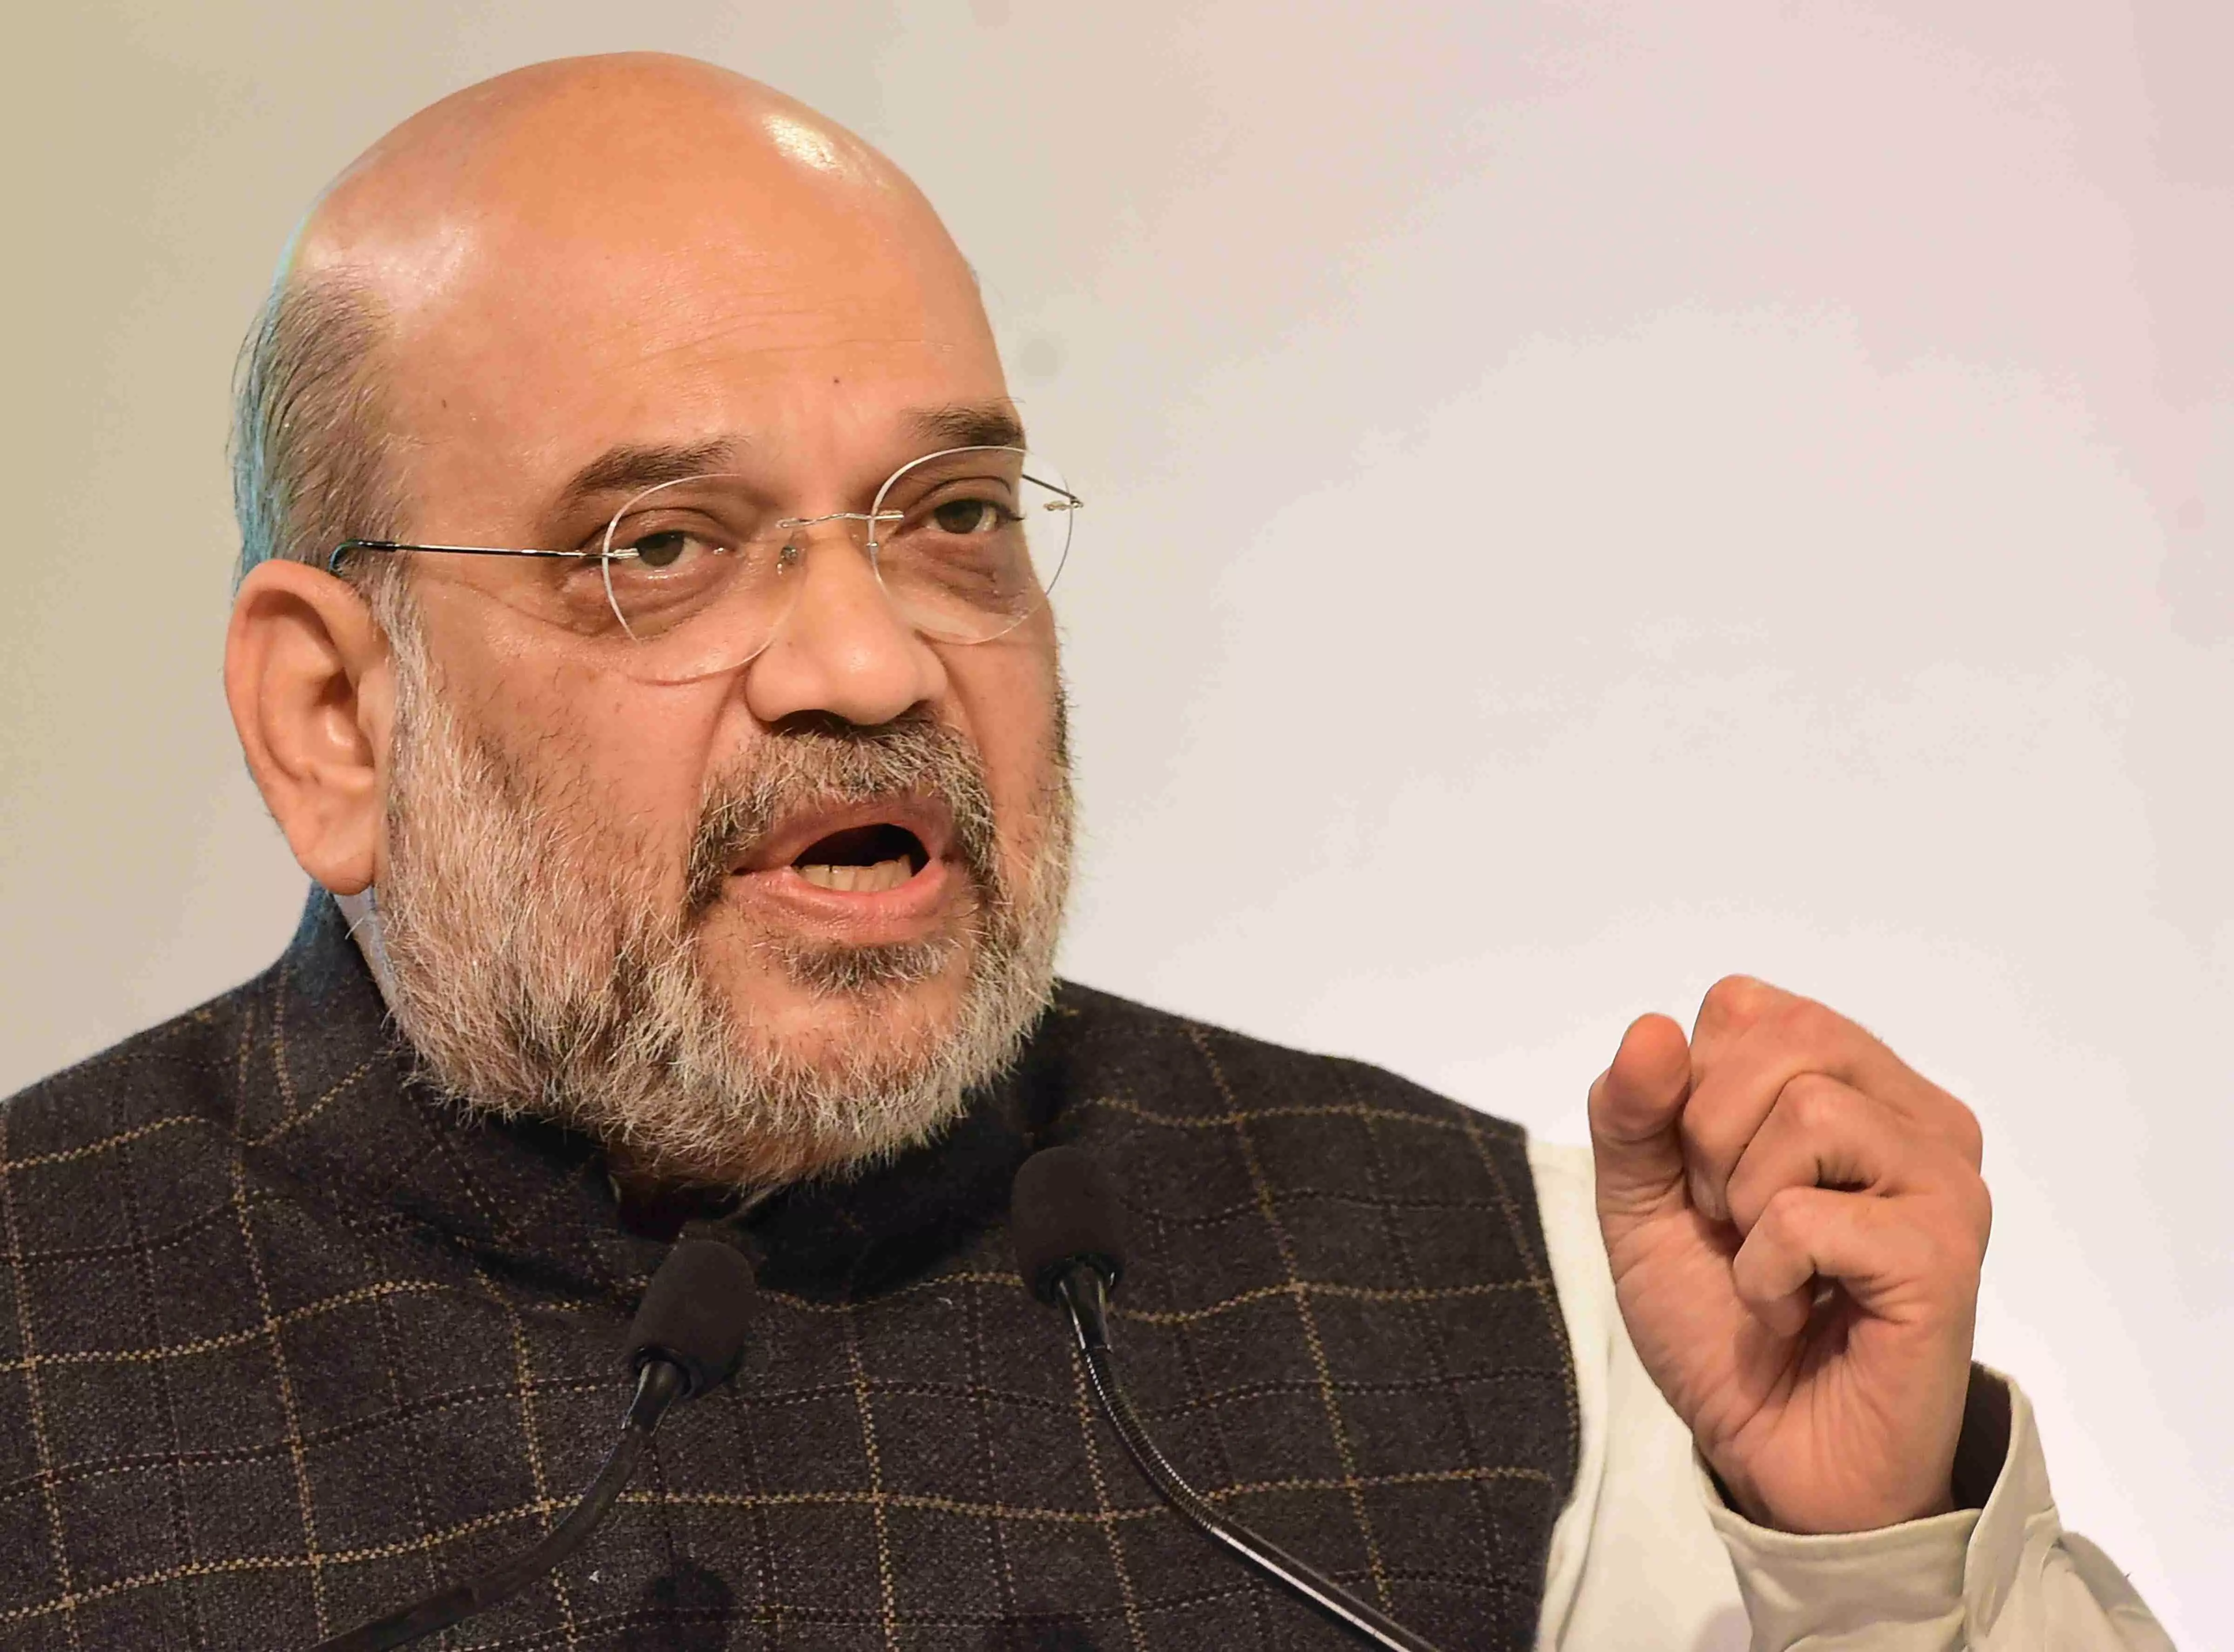 Shah confident of BJP win in Karnataka, says Rahul should not play victim after disrespecting OBCs